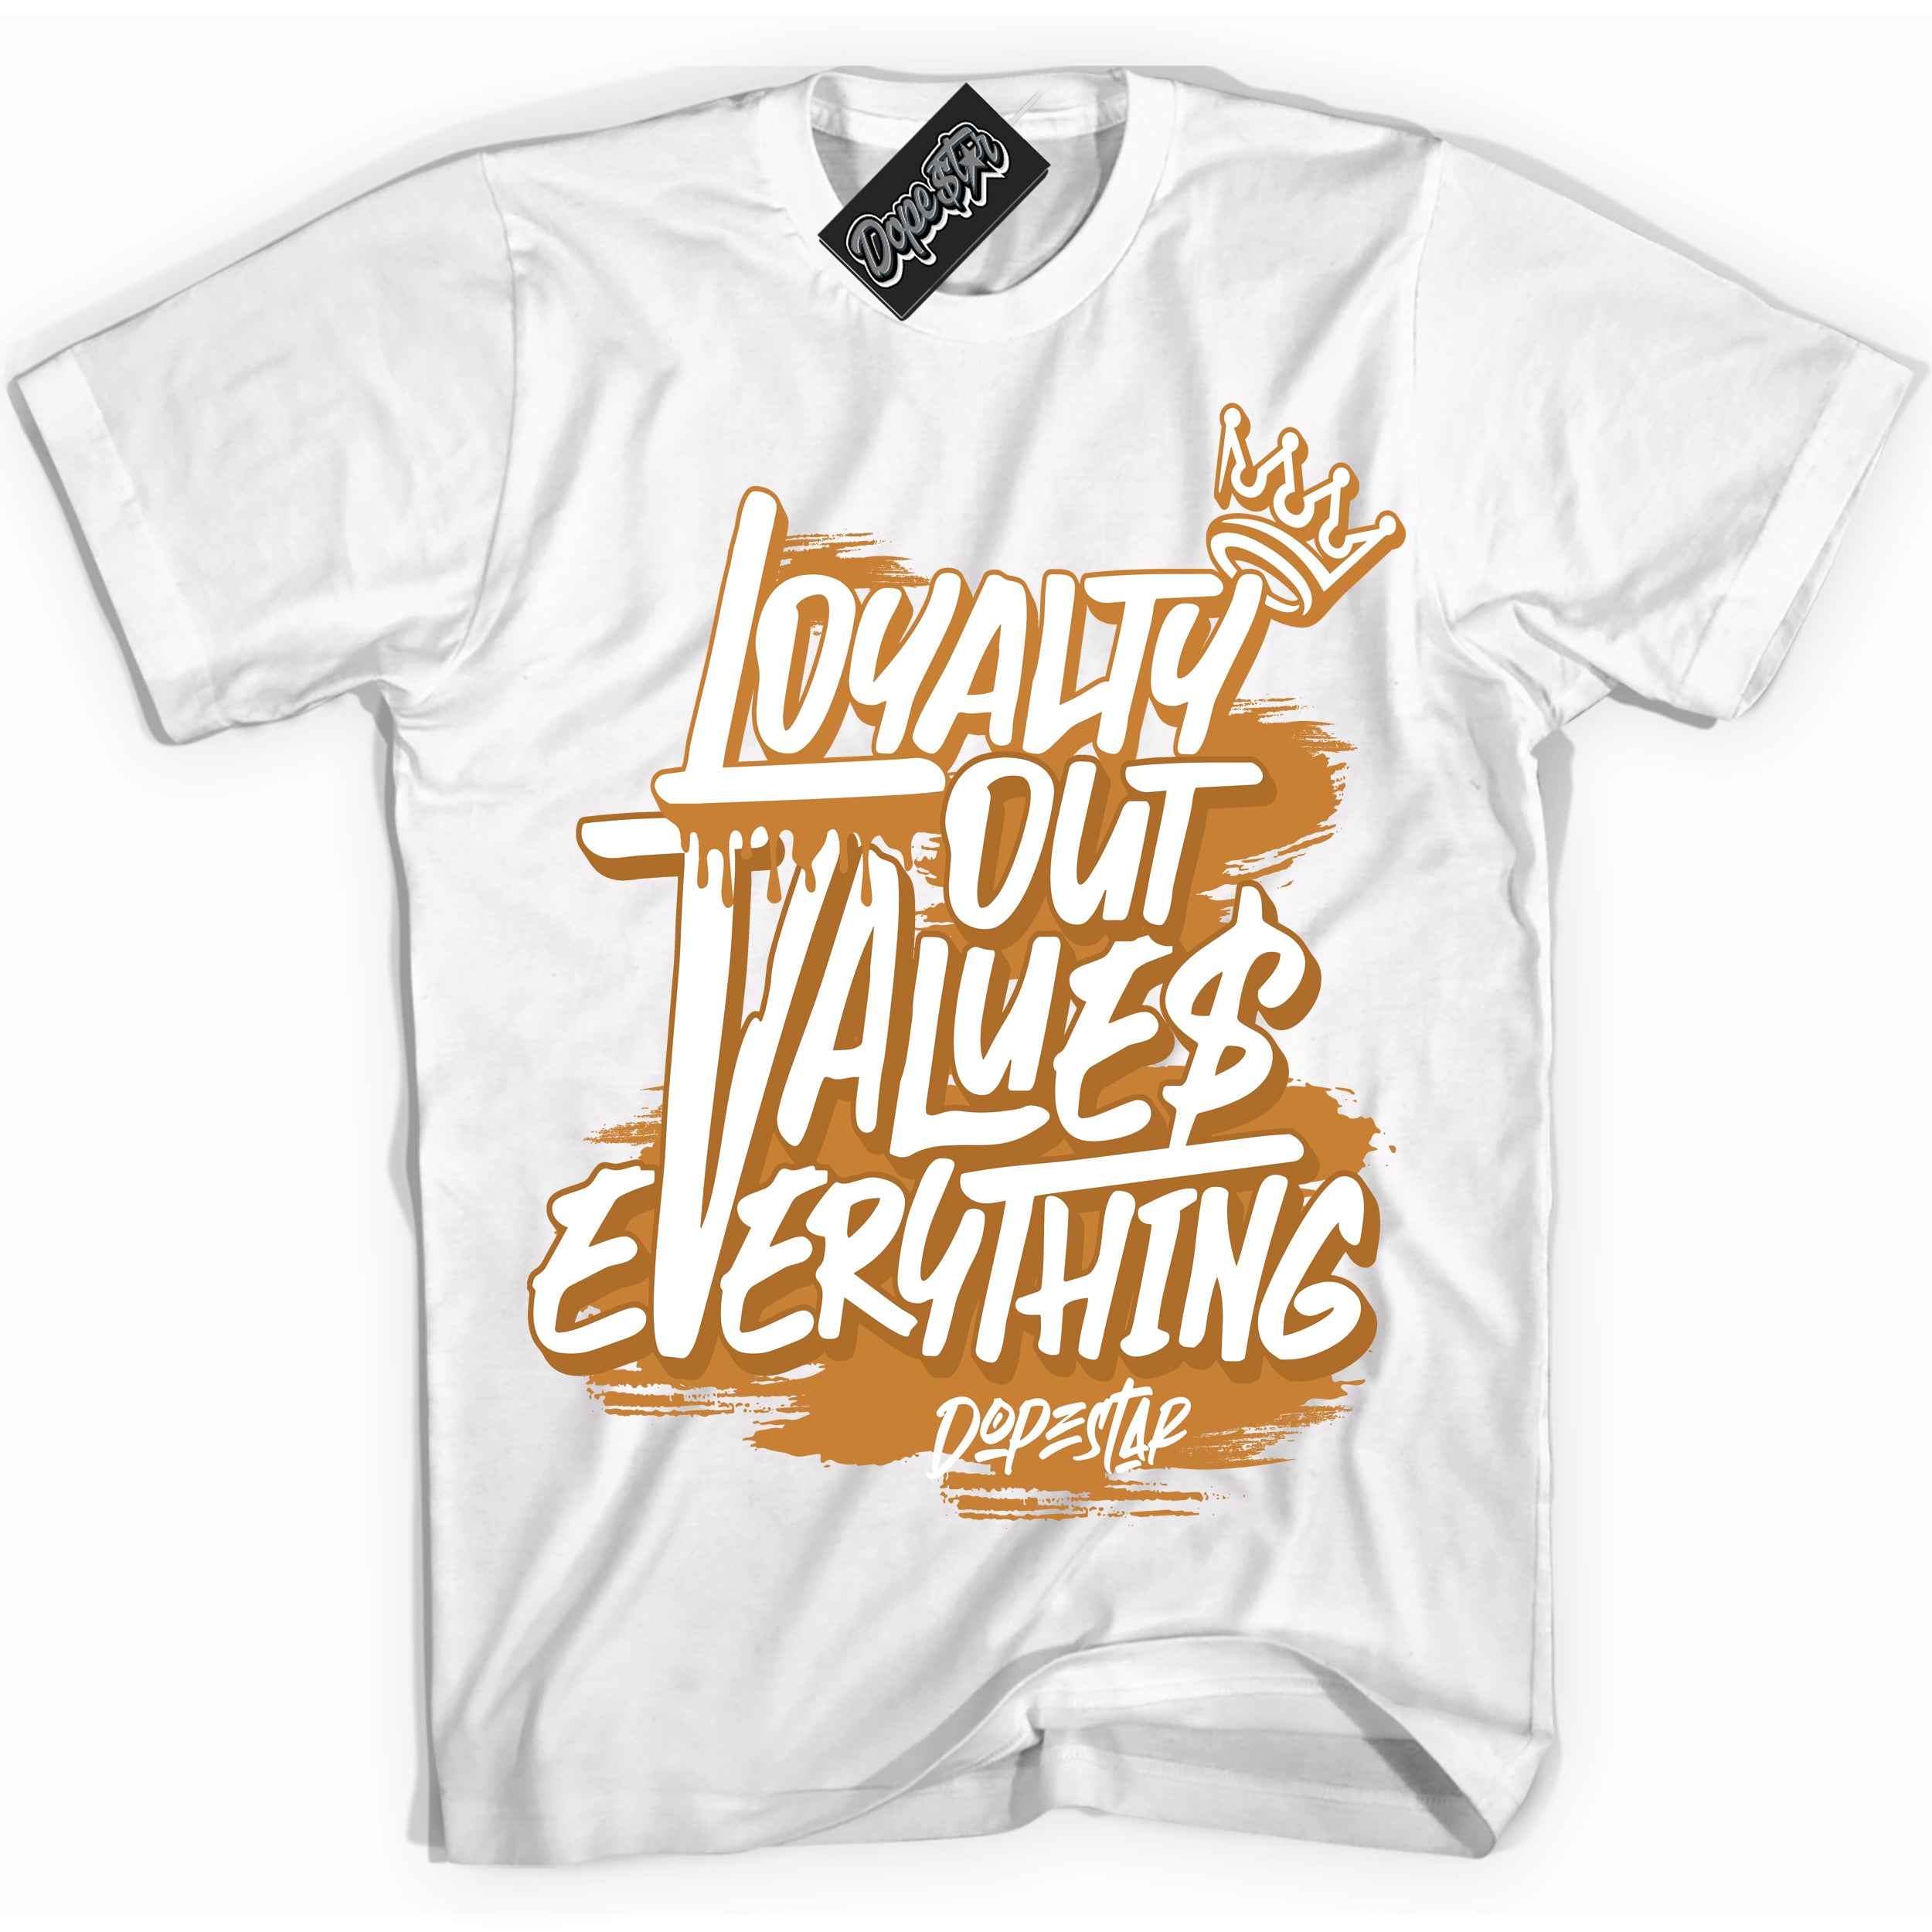 Cool White Shirt with “ Loyalty Out Values Everything” design that perfectly matches QS CO.JP Reverse Curry 2024 Sneakers.